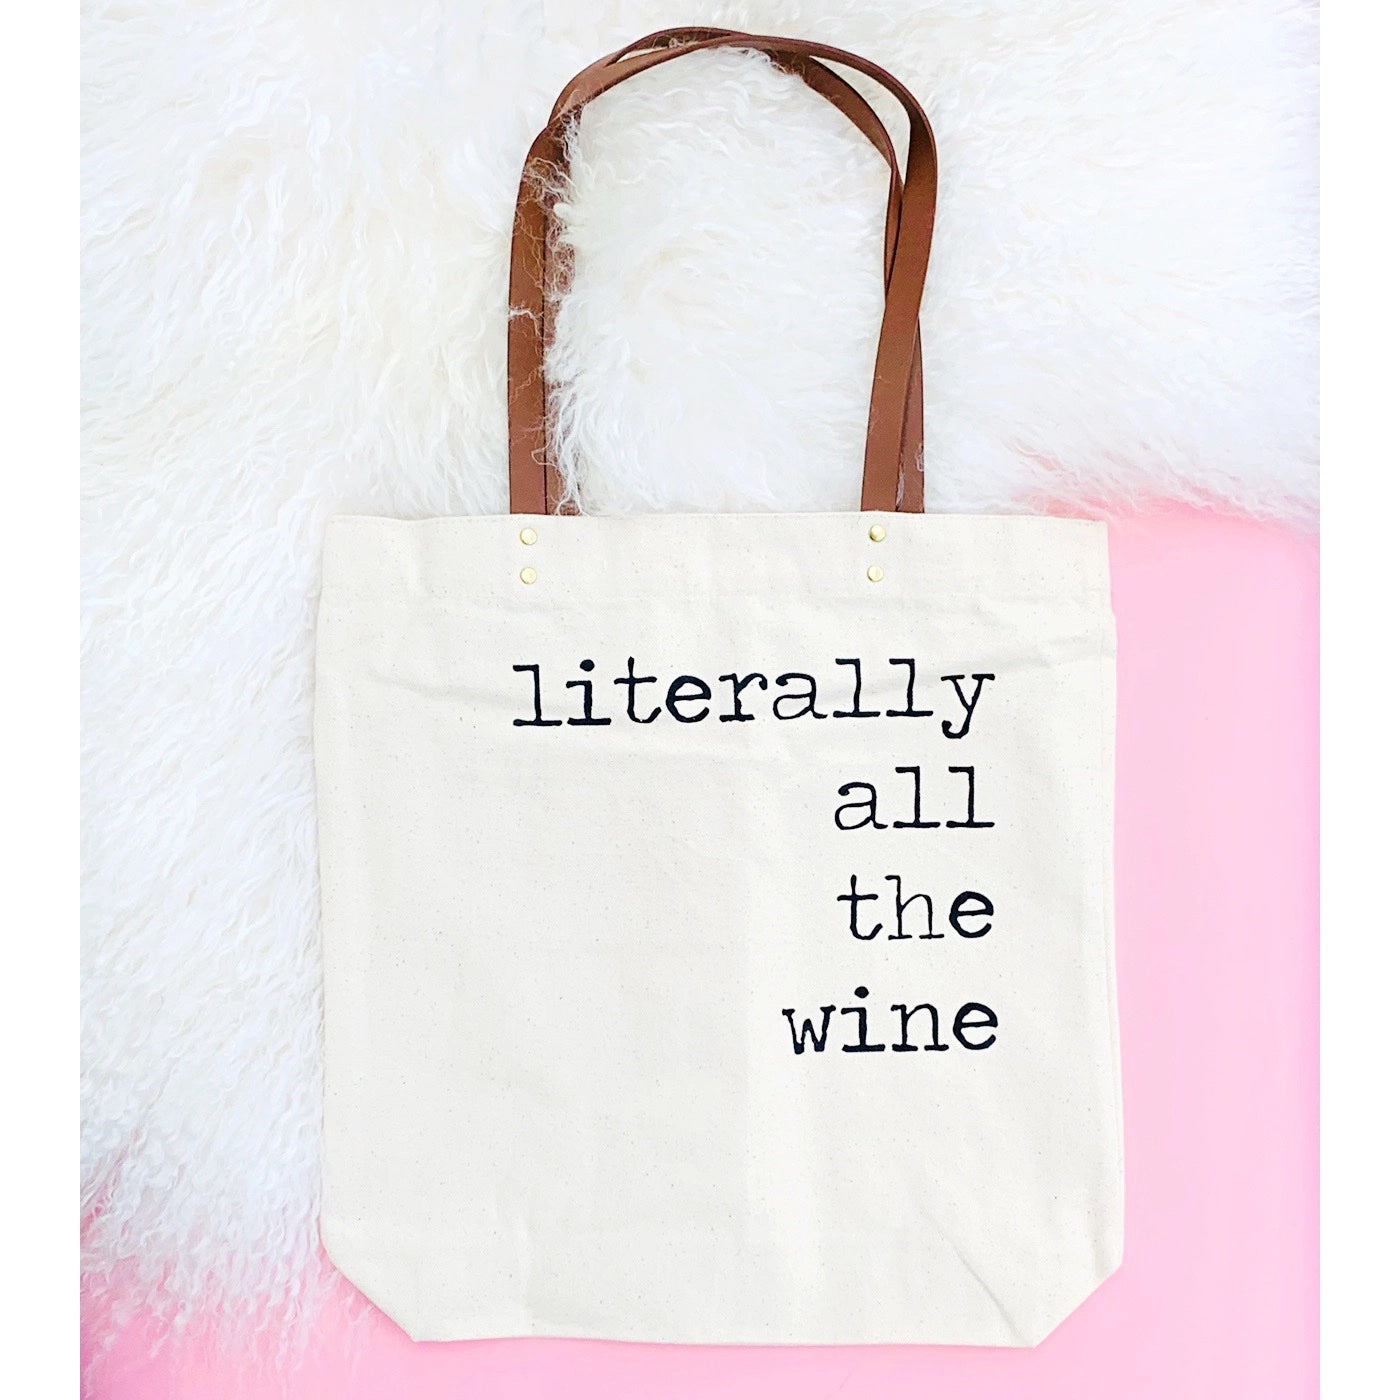 Canvas tote bag with faux leather straps that says "Literally all the wine"